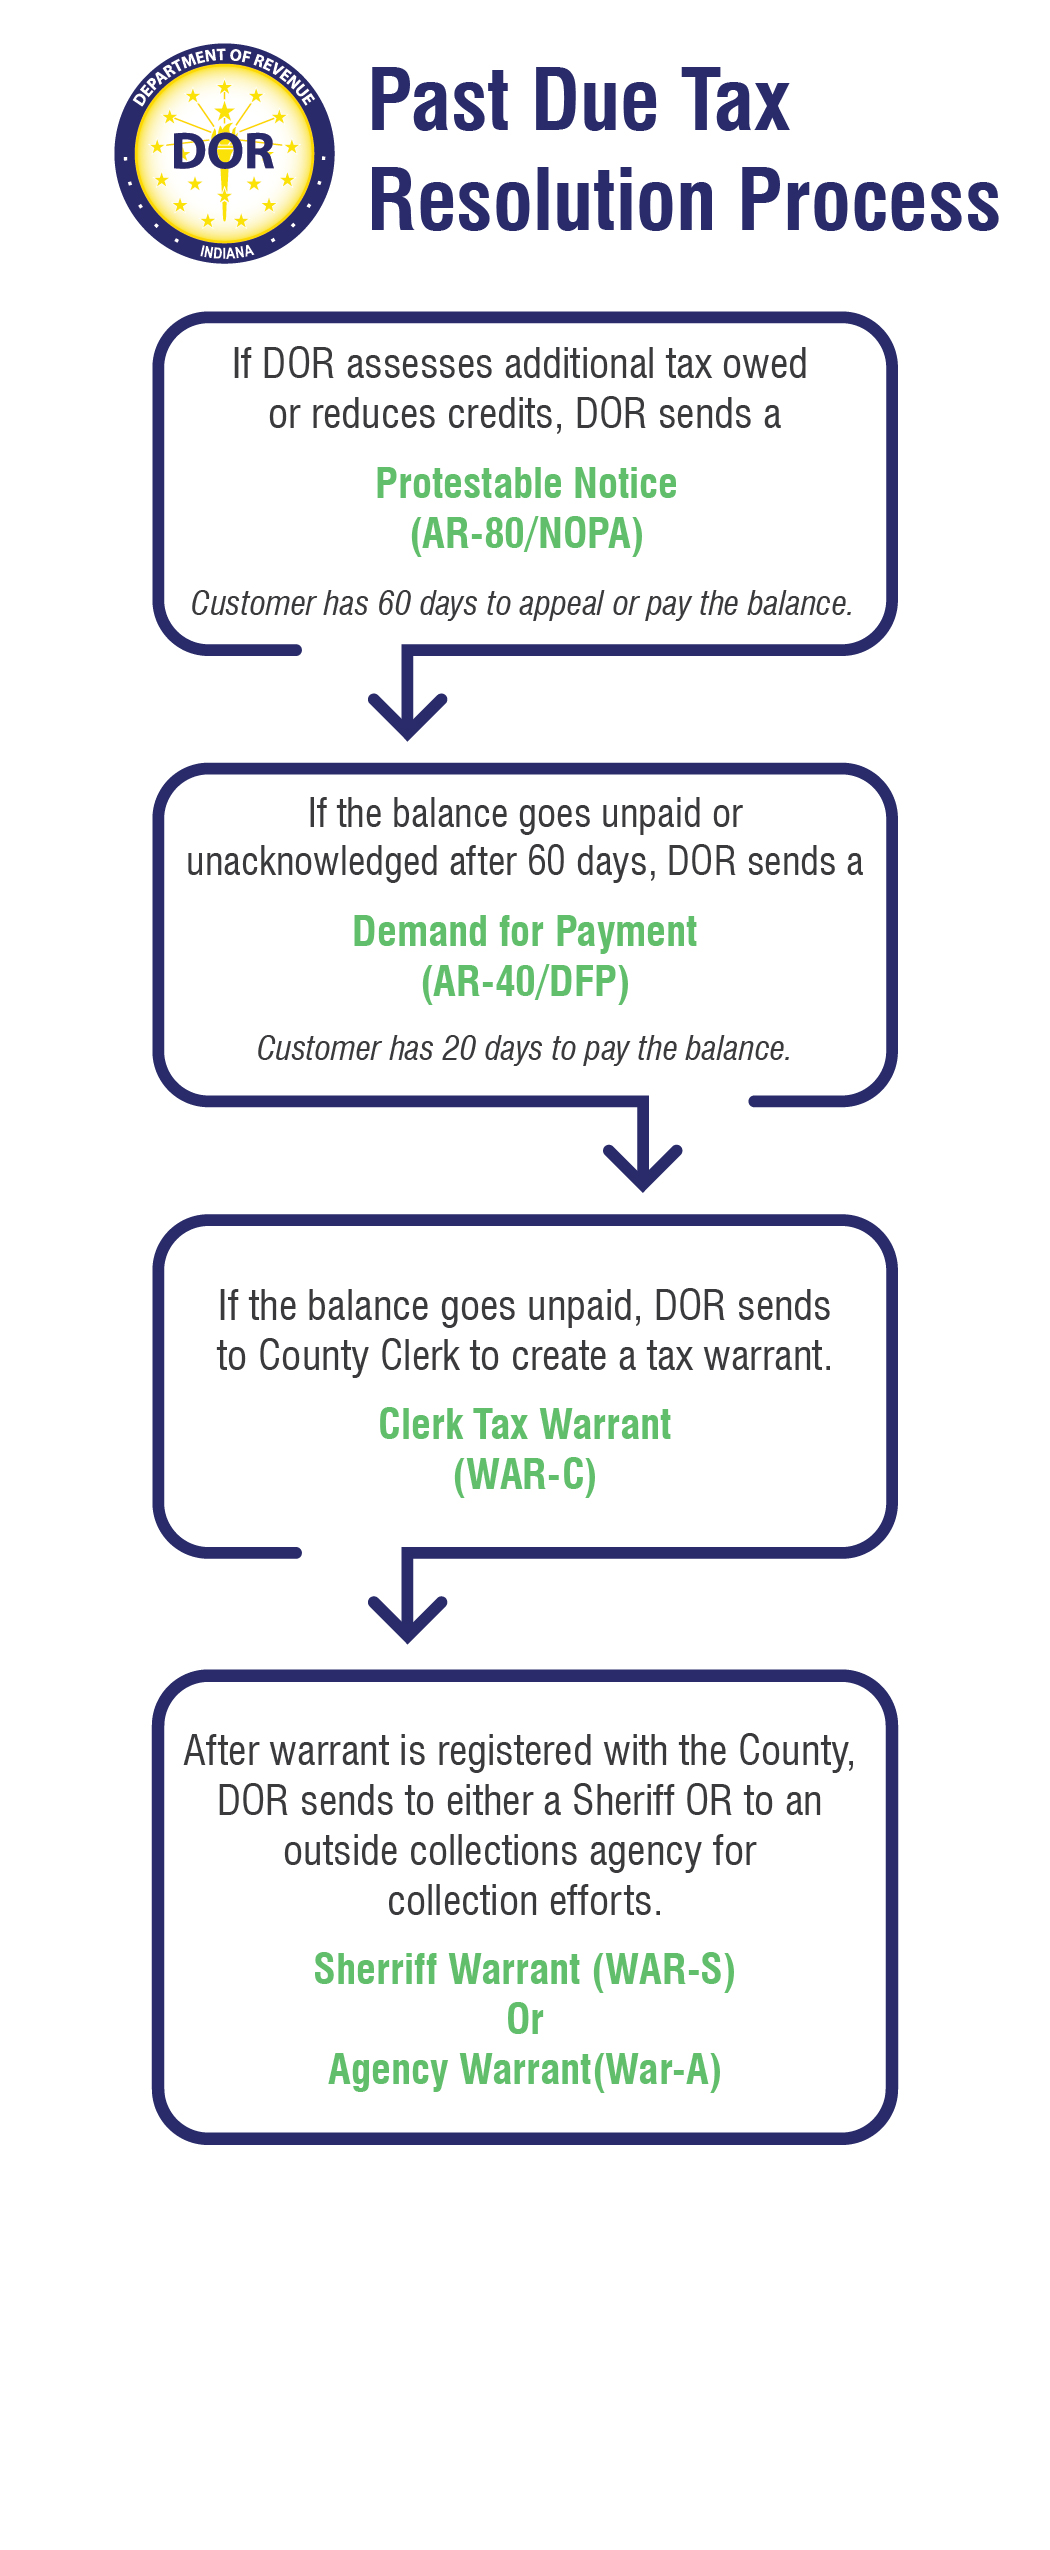 Past Due Tax Resolution Process: 1. If the Department of Revenue assesses additional tax owed or reduce credits, DOR sends a Portestable Notice (AR-80/NOPA) (Customer has 60 days to appeal or pay the balance). 2. If the balance goes unpaid or unacknowledged after 60 days, DOR sends a Demand for Payment (AR-40/DFP) (Customer has 20 days to pay the balance). 3. If the balance goes unpaid, DOR sends it to the County Clerk to create a tax warrant: Clerk Tax Warrant (WAR-C). 4. After warrant is registered with the County, DOR sends to either a Sheriff or to an outside collections agency for collection efforts (Sheriff Warrant (WAR-S) or Agency Warrant (WAR-A)).